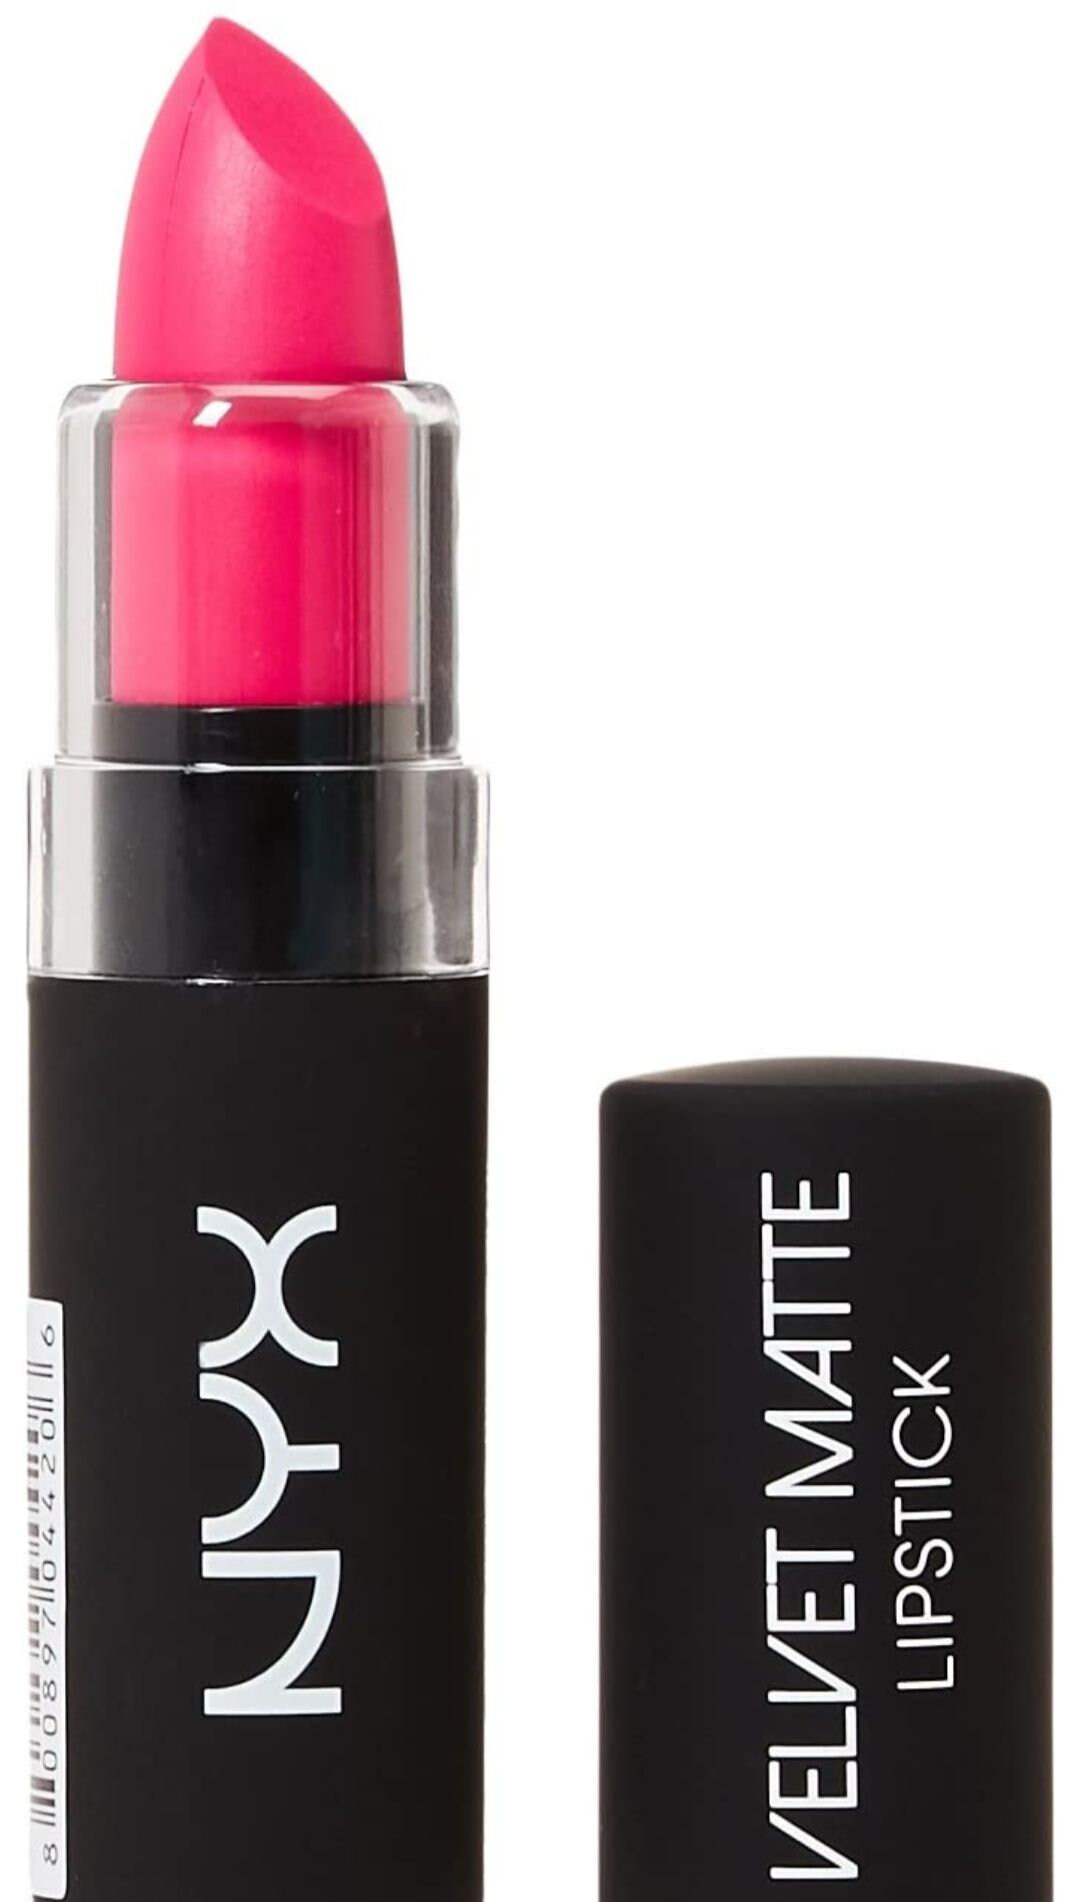 Best New Makeup Products and Beauty Products of May 2021, Shop Now, Maybelline New York, HipDot, Revlon